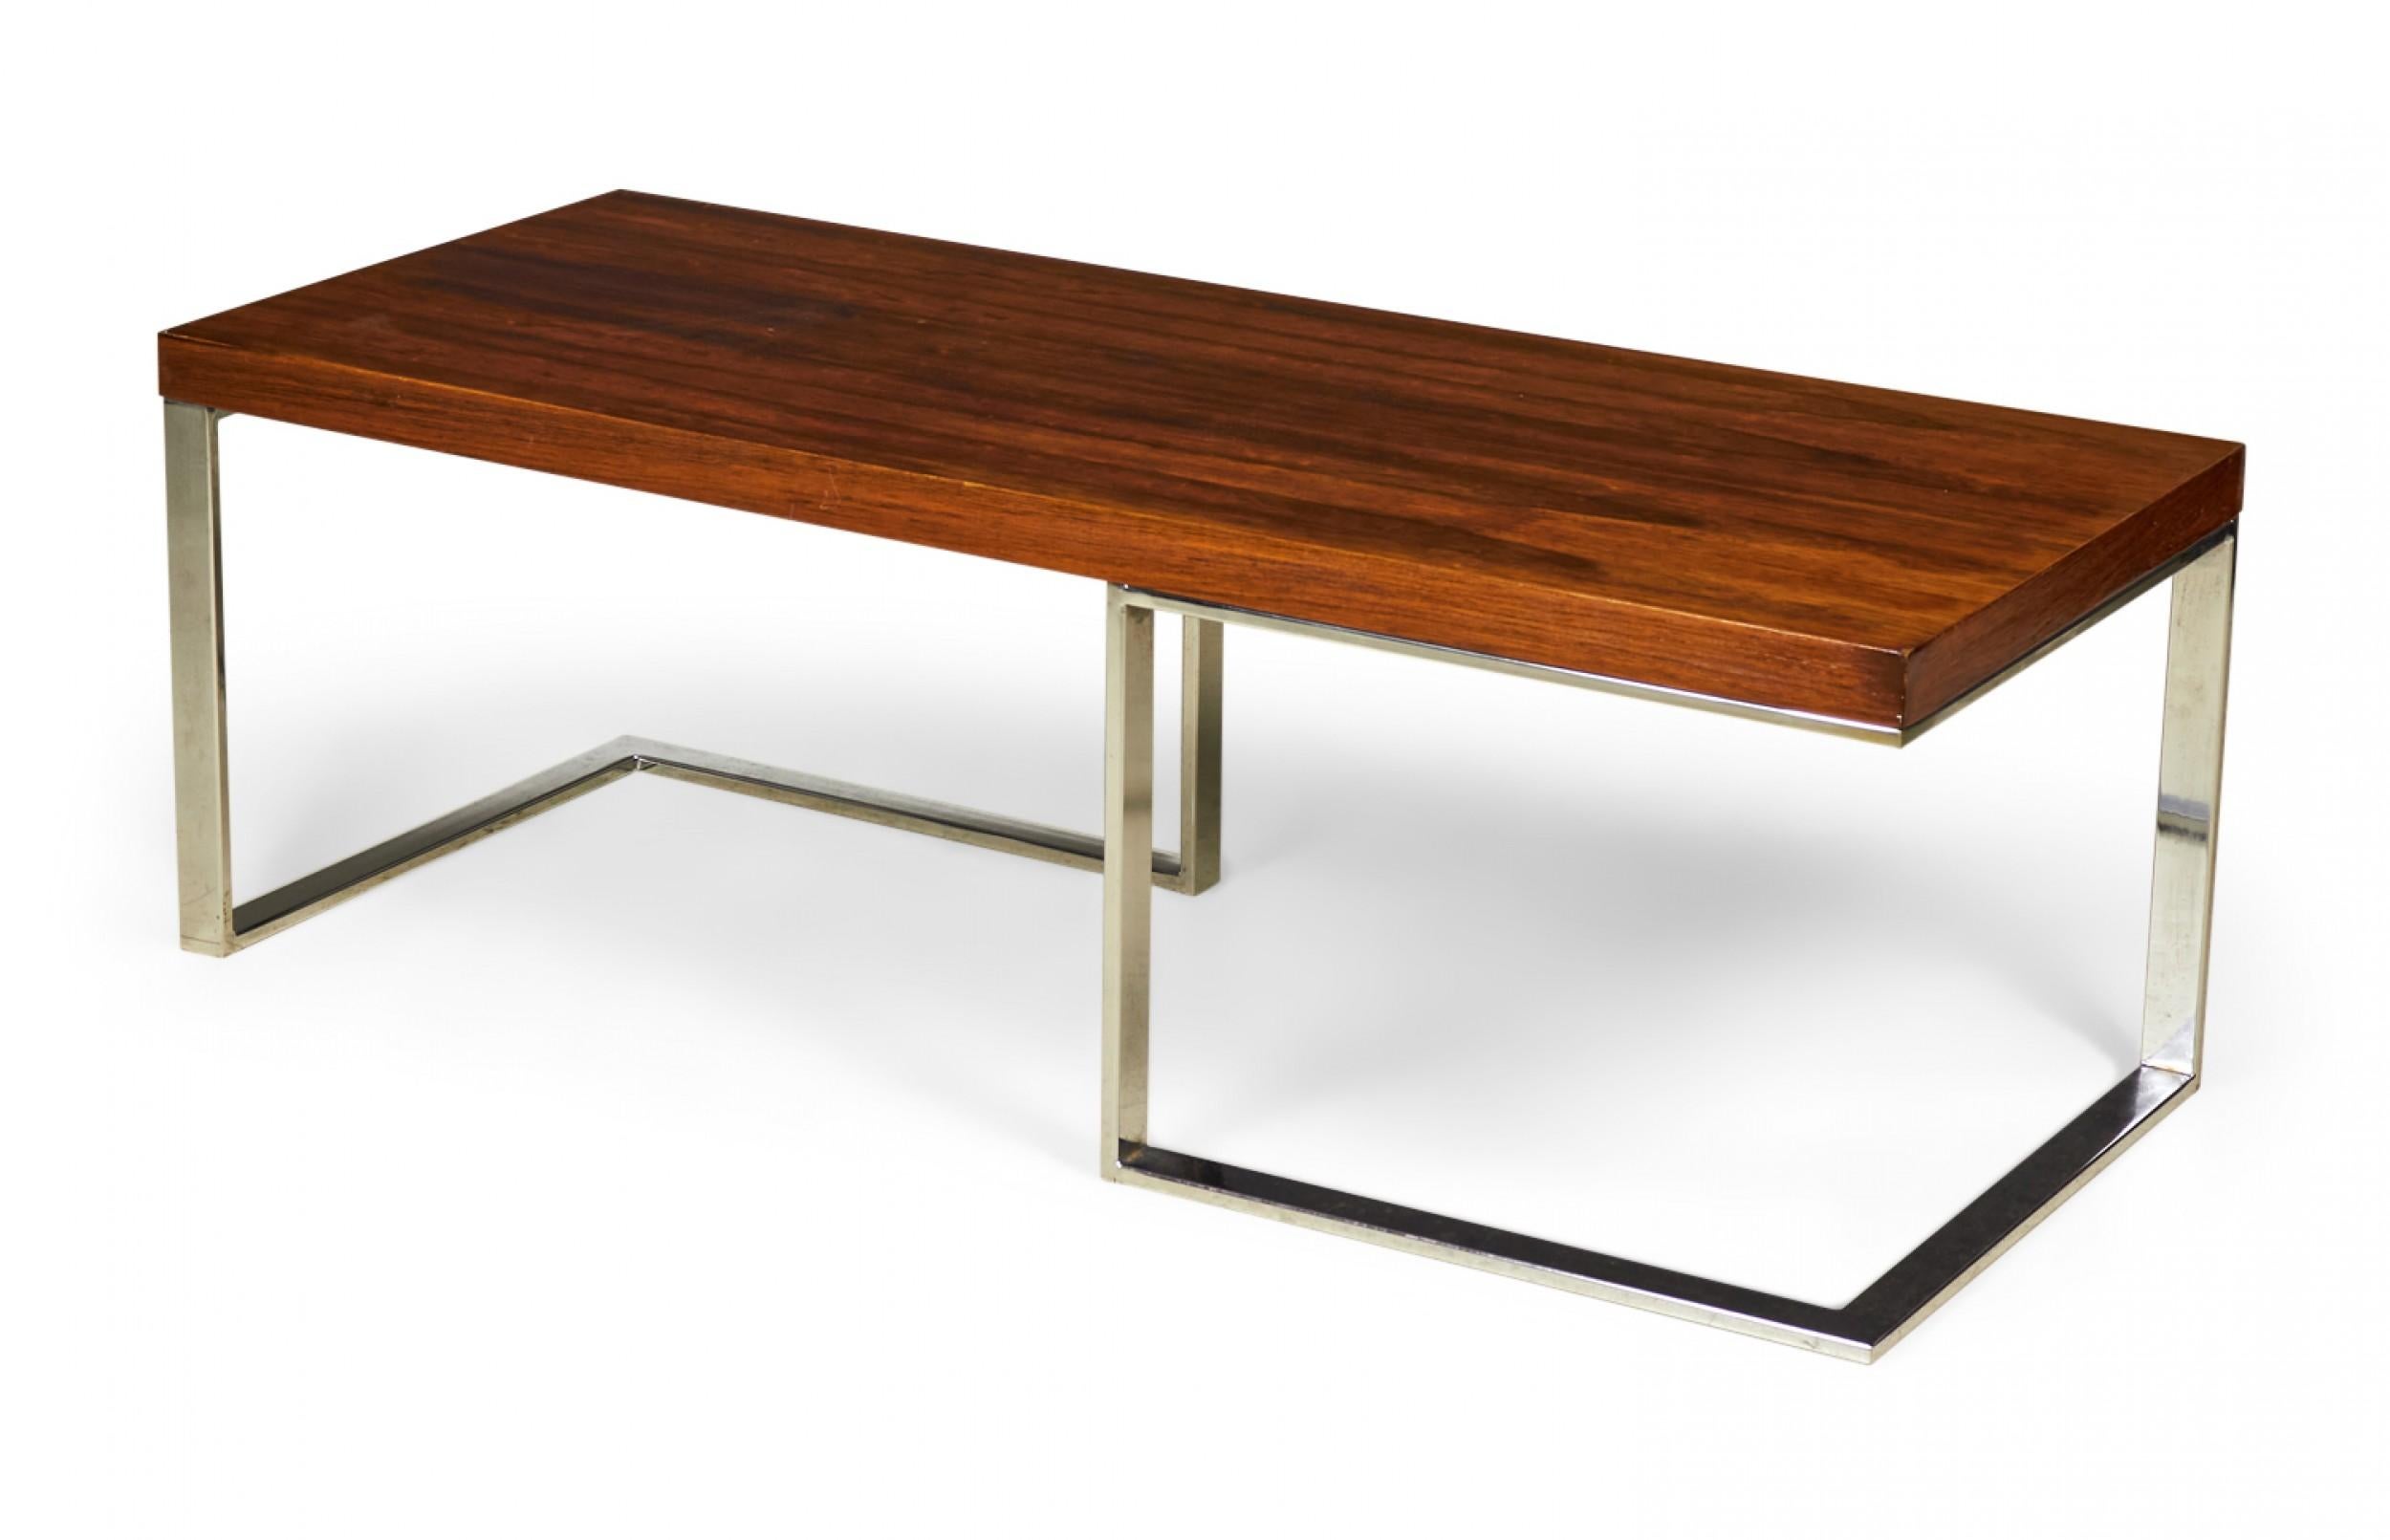 American Mid-Century (circa 1970) rectangular 'Minimalist' coffee table with a rosewood top supported on a chrome plated steel frame. (MILO BAUGHMAN FOR THAYER COGGIN)